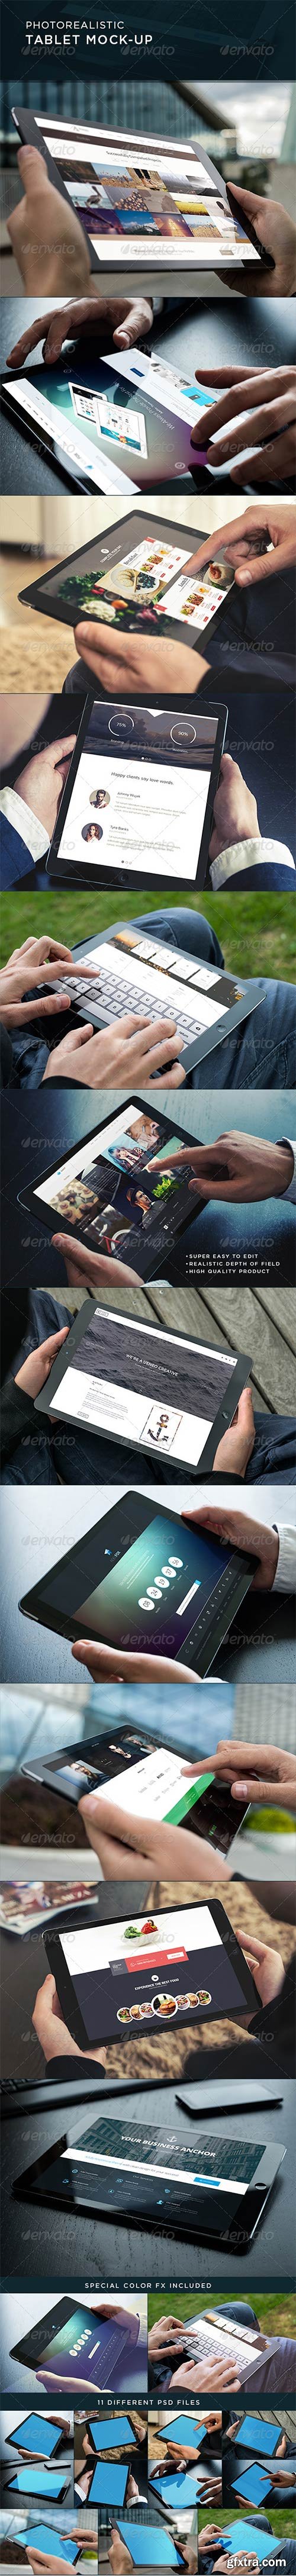 GraphicRiver - Photorealistic Tablet Mock-Up 8765380